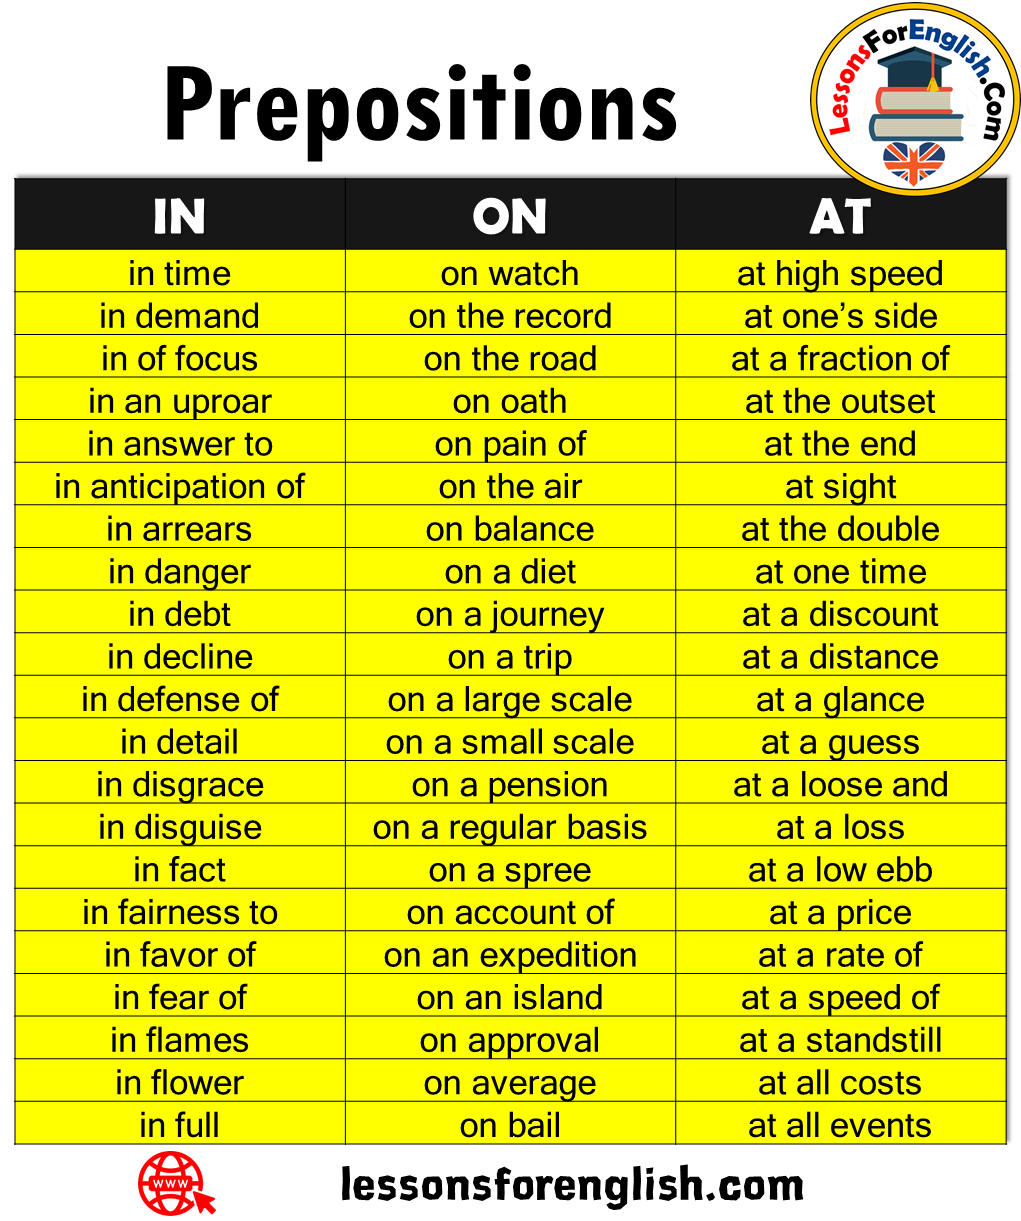 100-most-common-prepositions-list-in-english-english-study-online